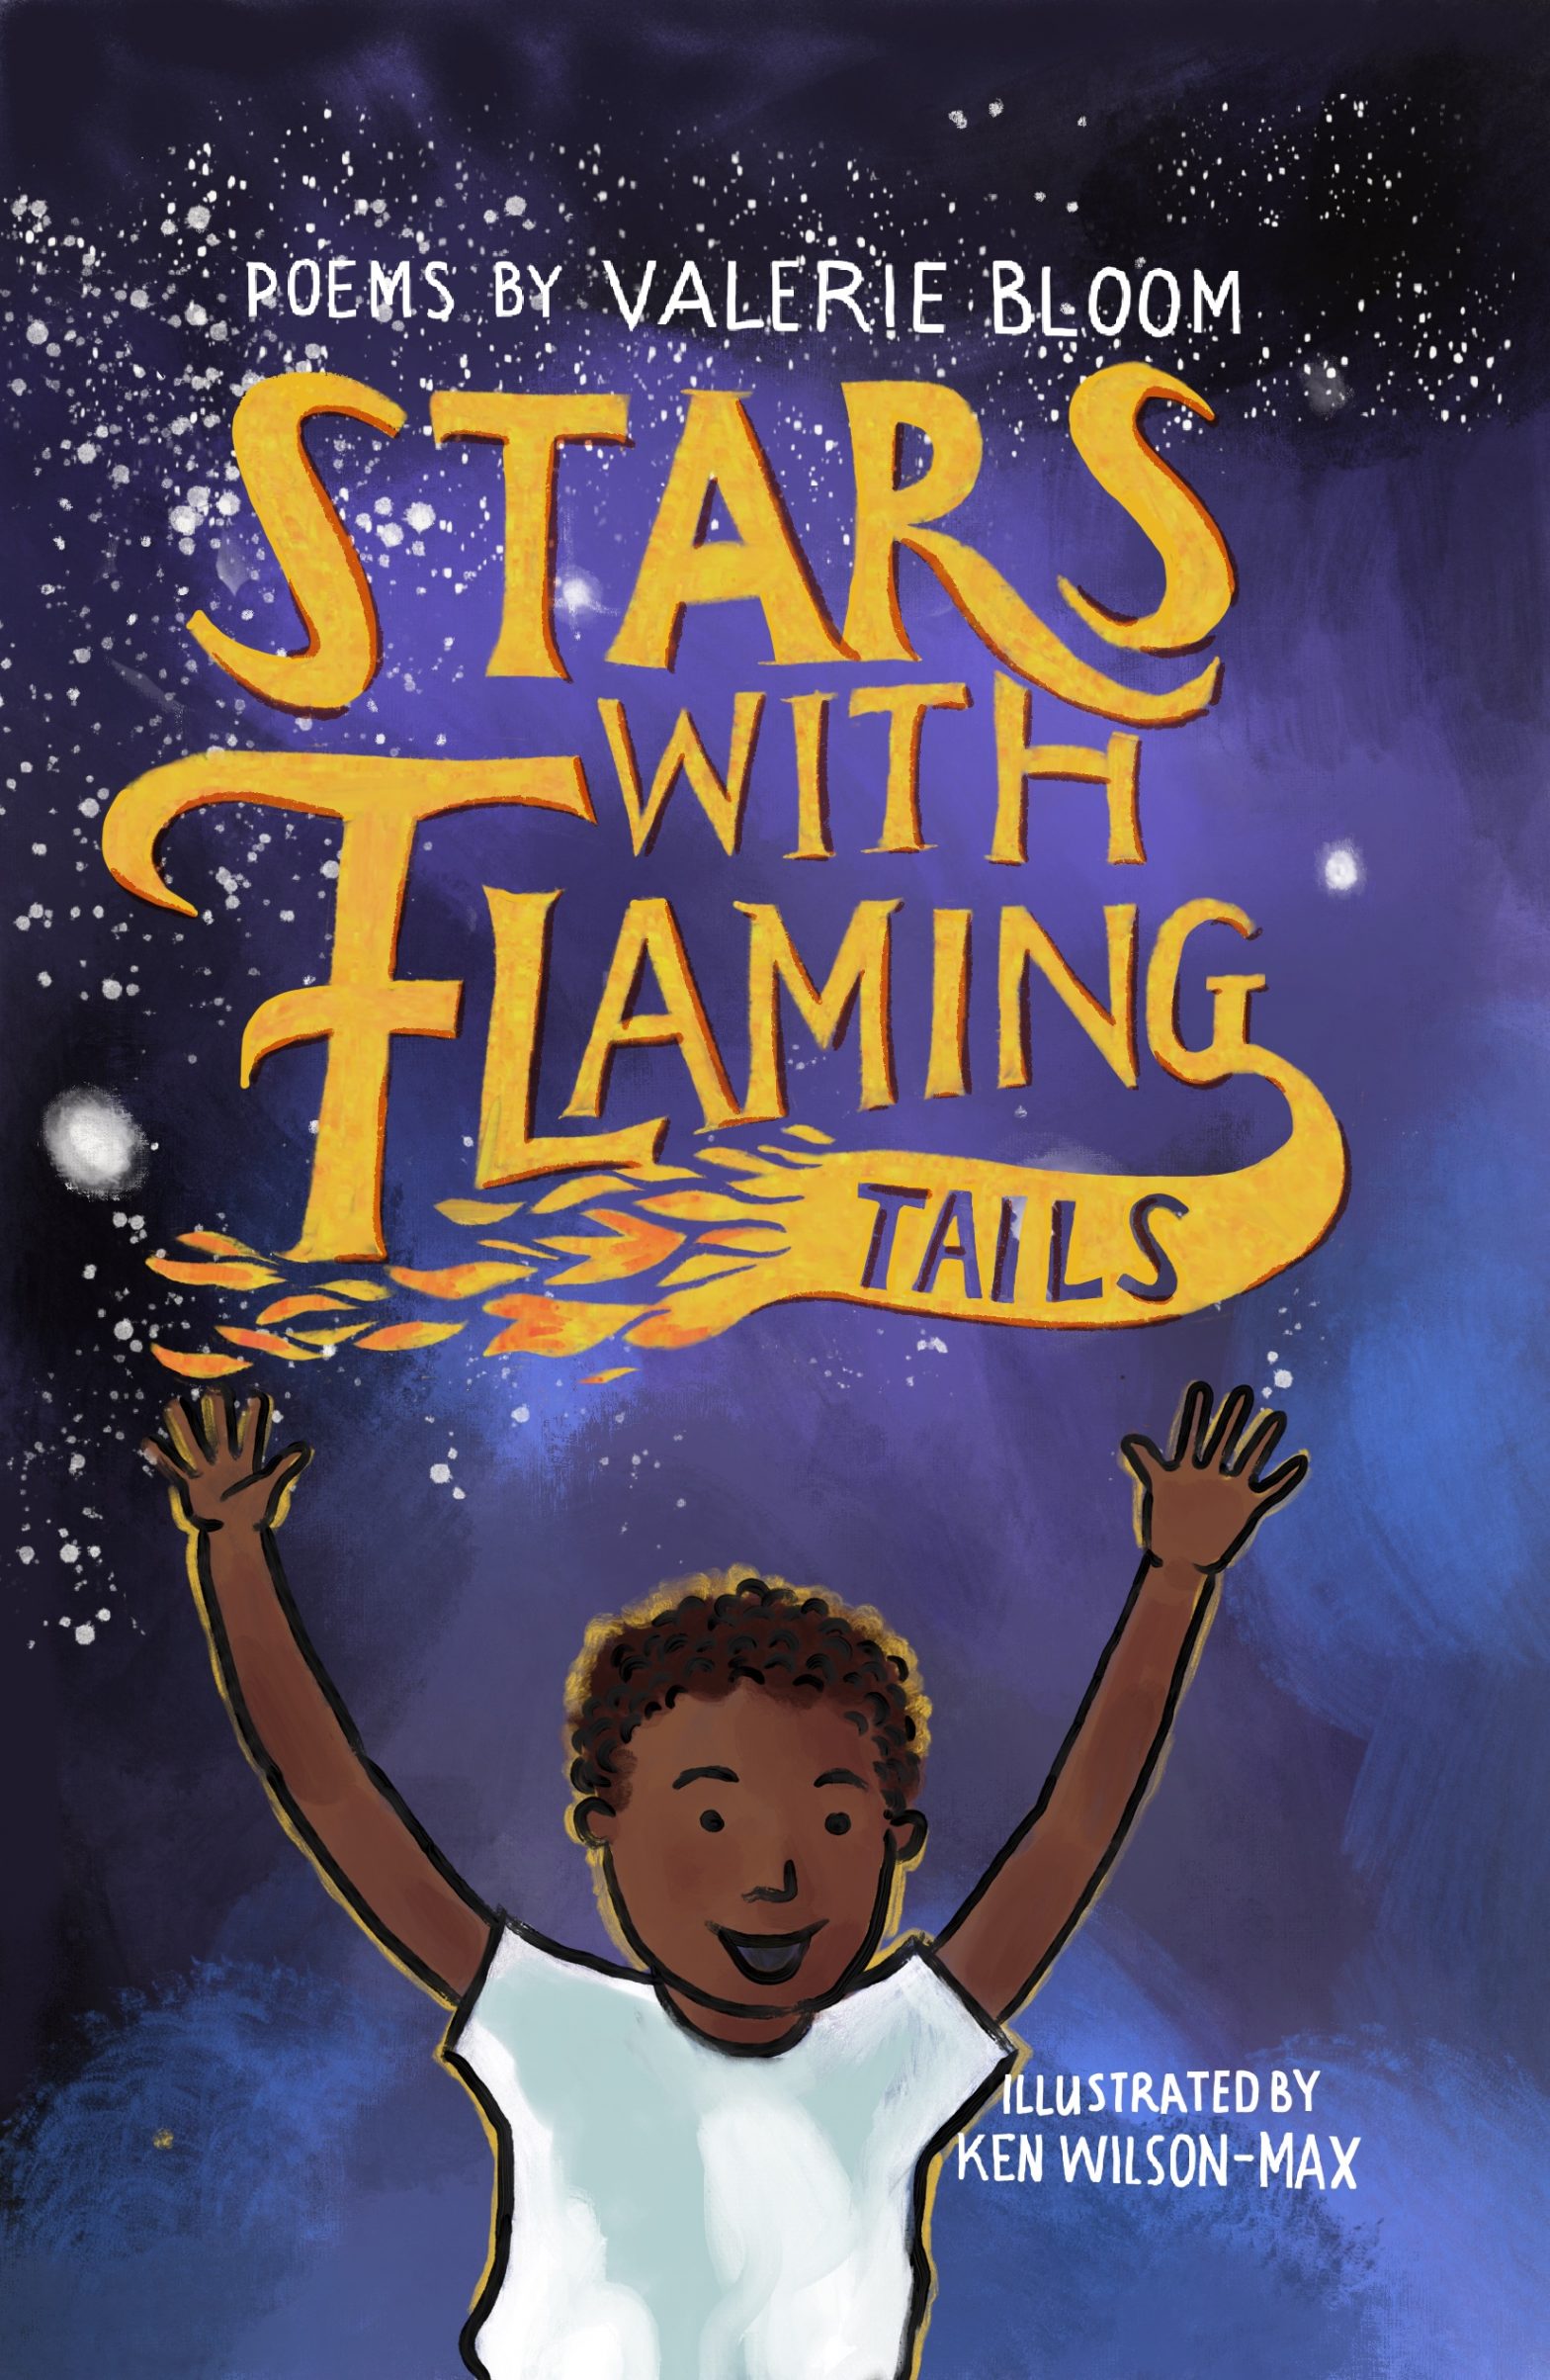 Update: Stars With Flaming Tails Won the CLiPPA Award!